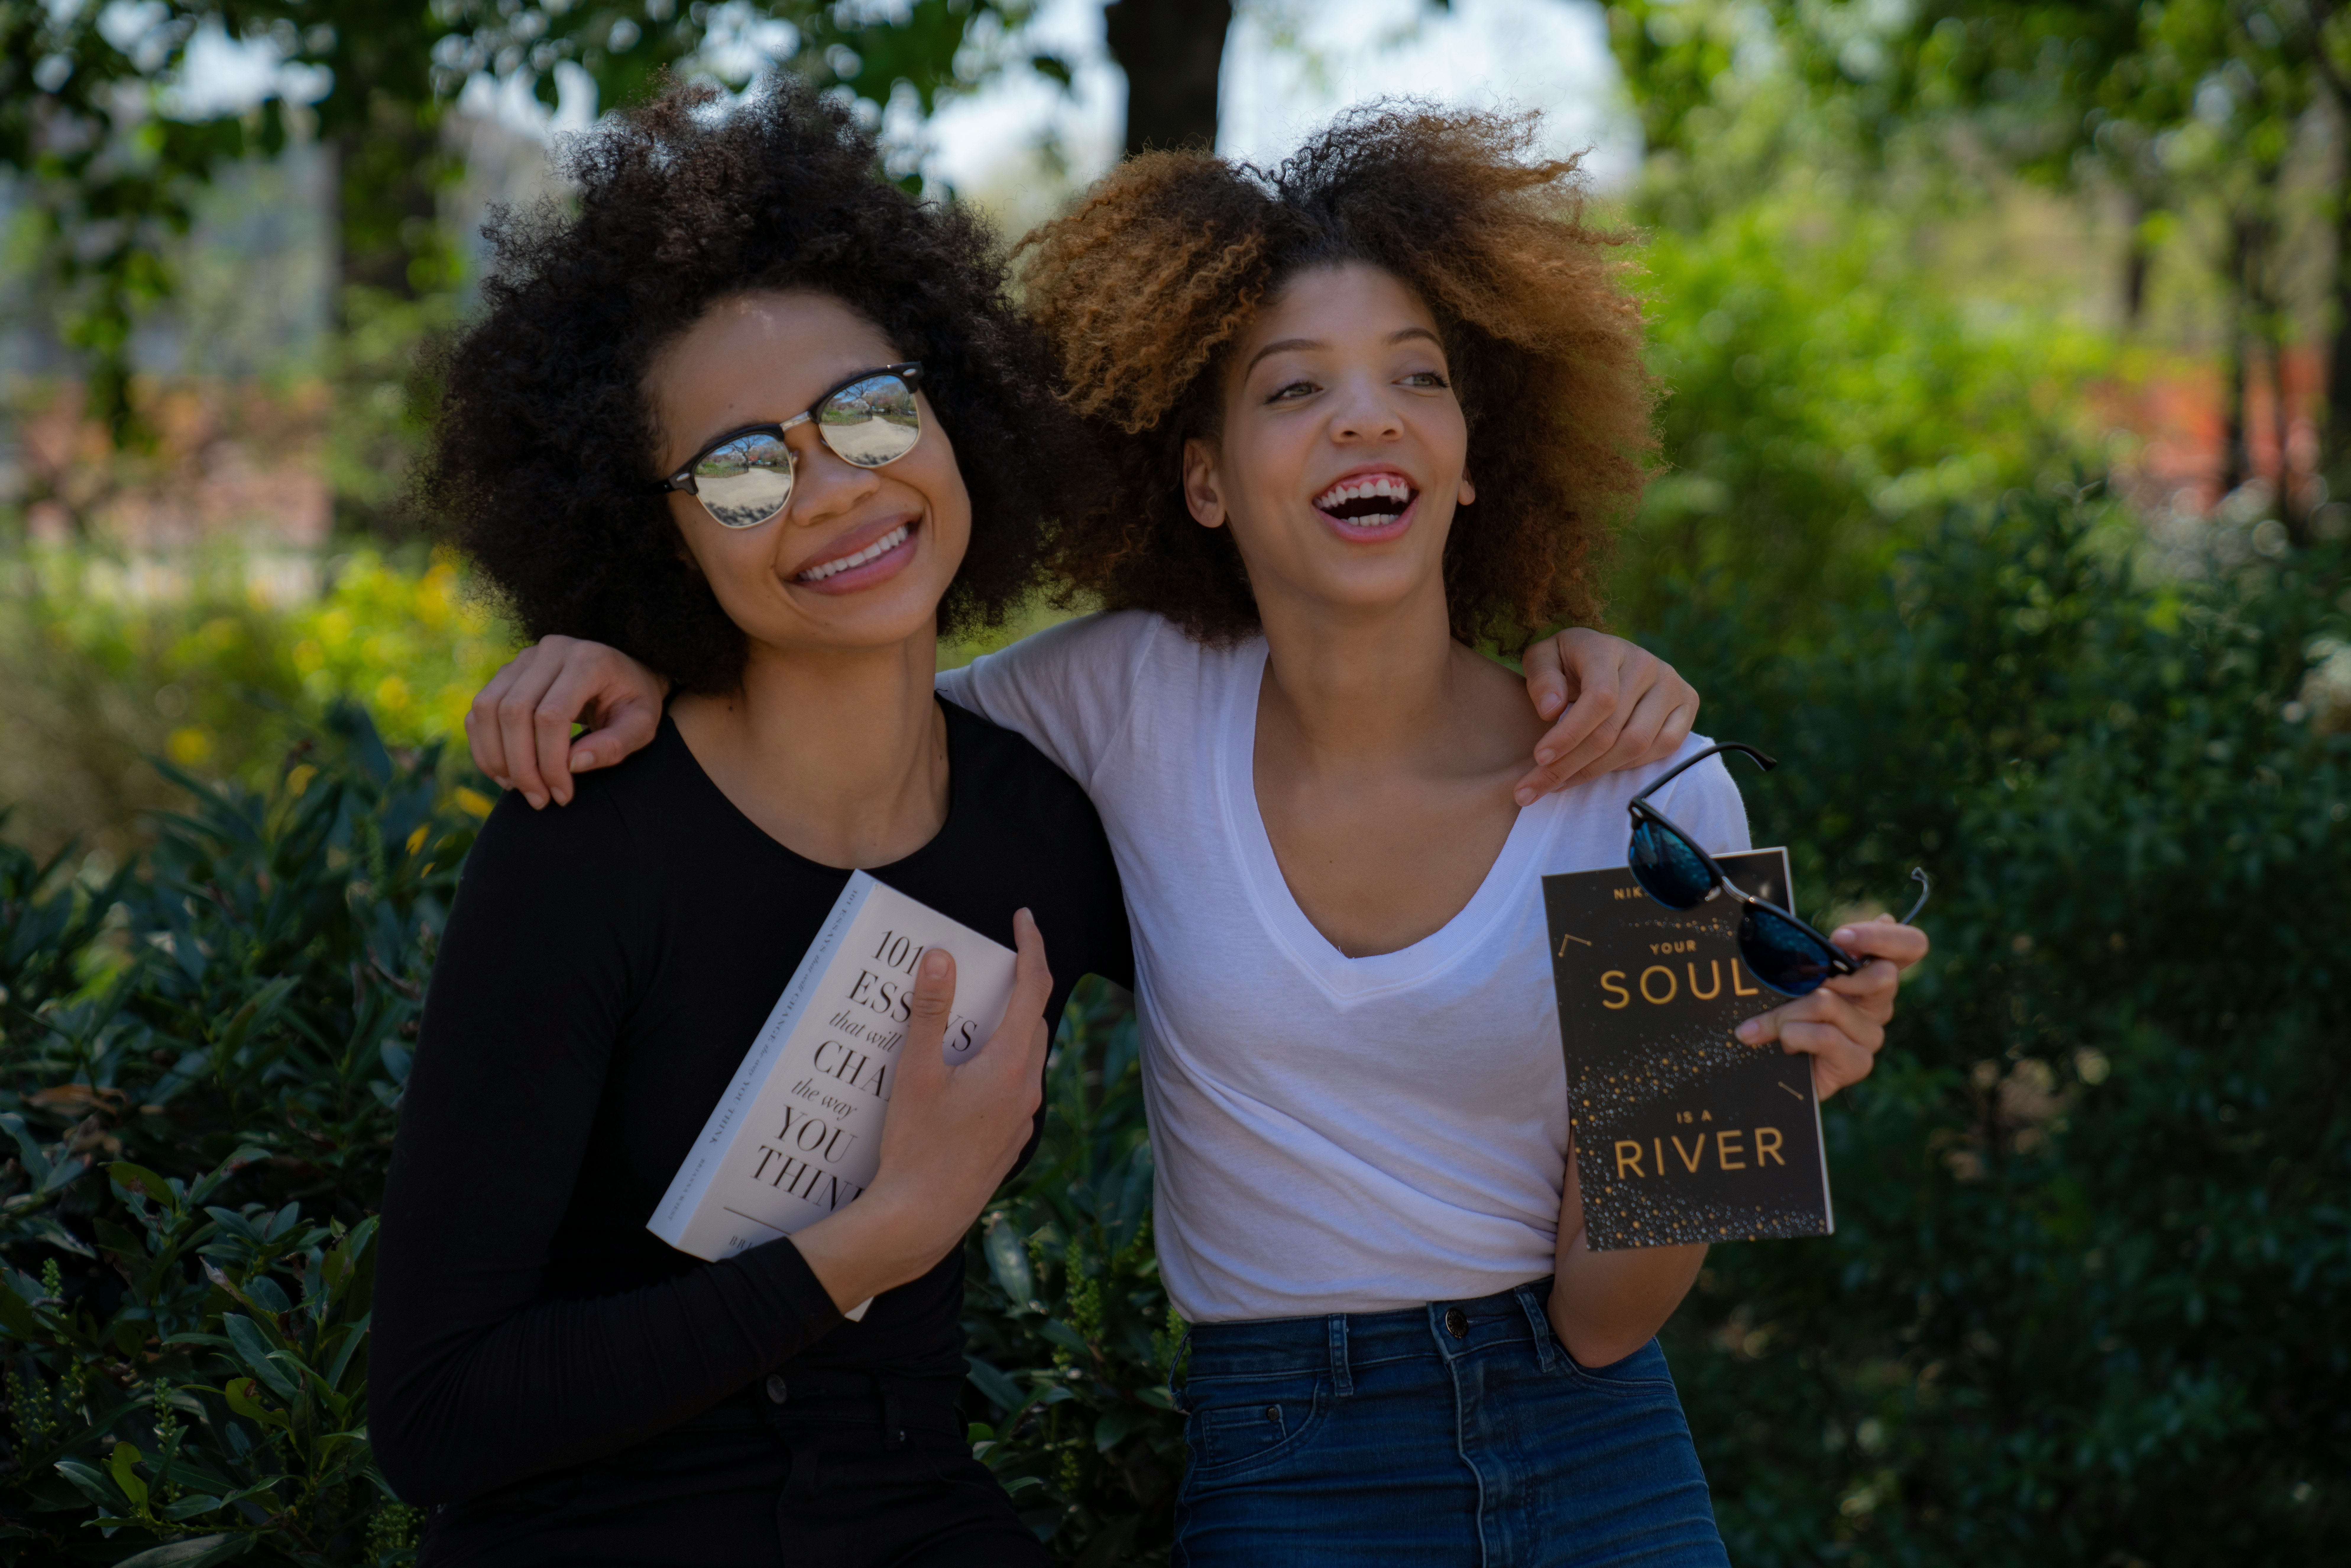 two smiling women while holding novel books